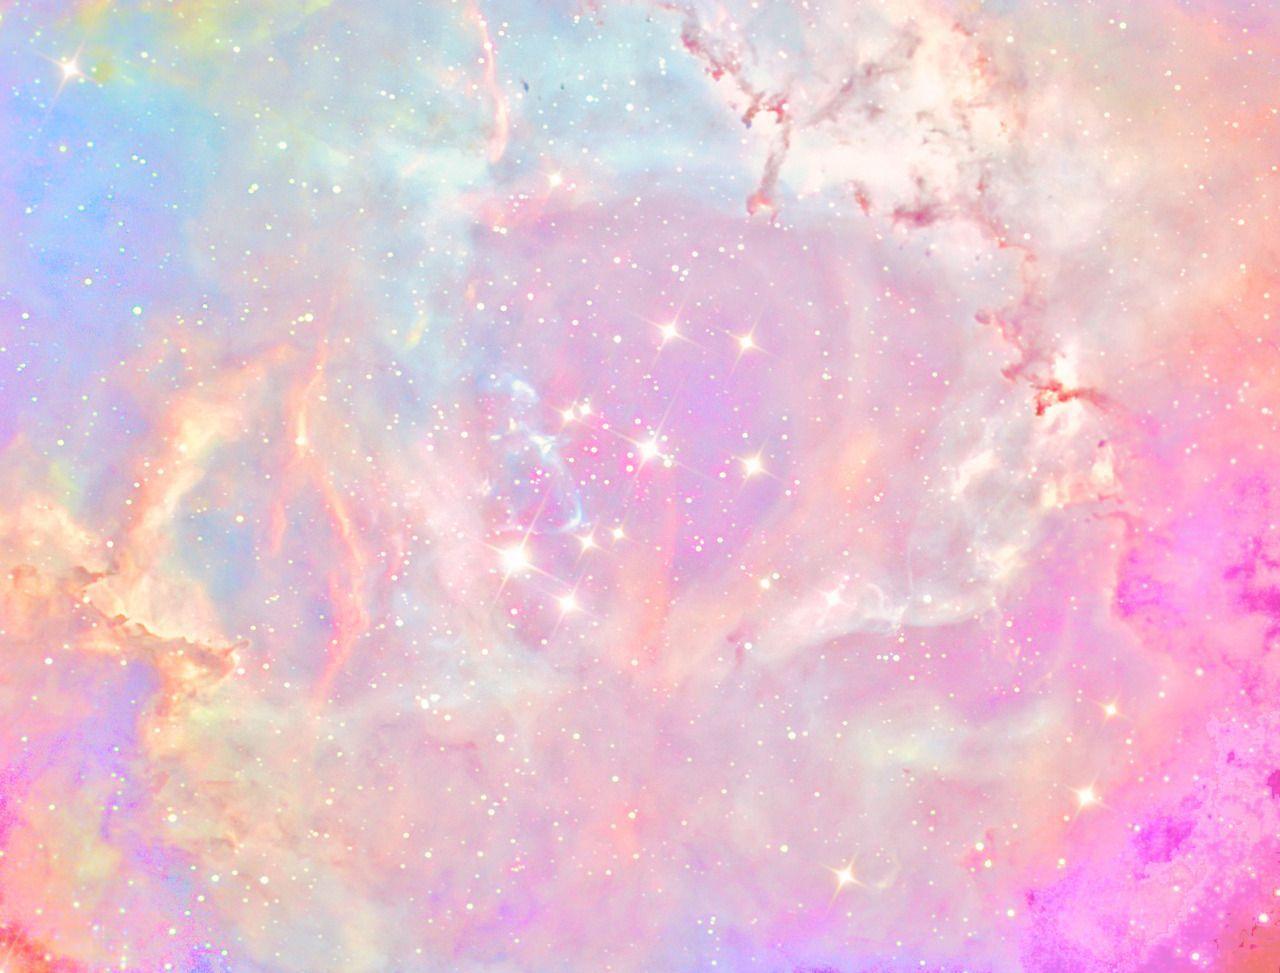 Pastel Galaxy Computer Wallpapers Top Free Pastel Galaxy Computer Backgrounds Wallpaperaccess About galaxy, sky, star, space and purple 2336384. pastel galaxy computer wallpapers top